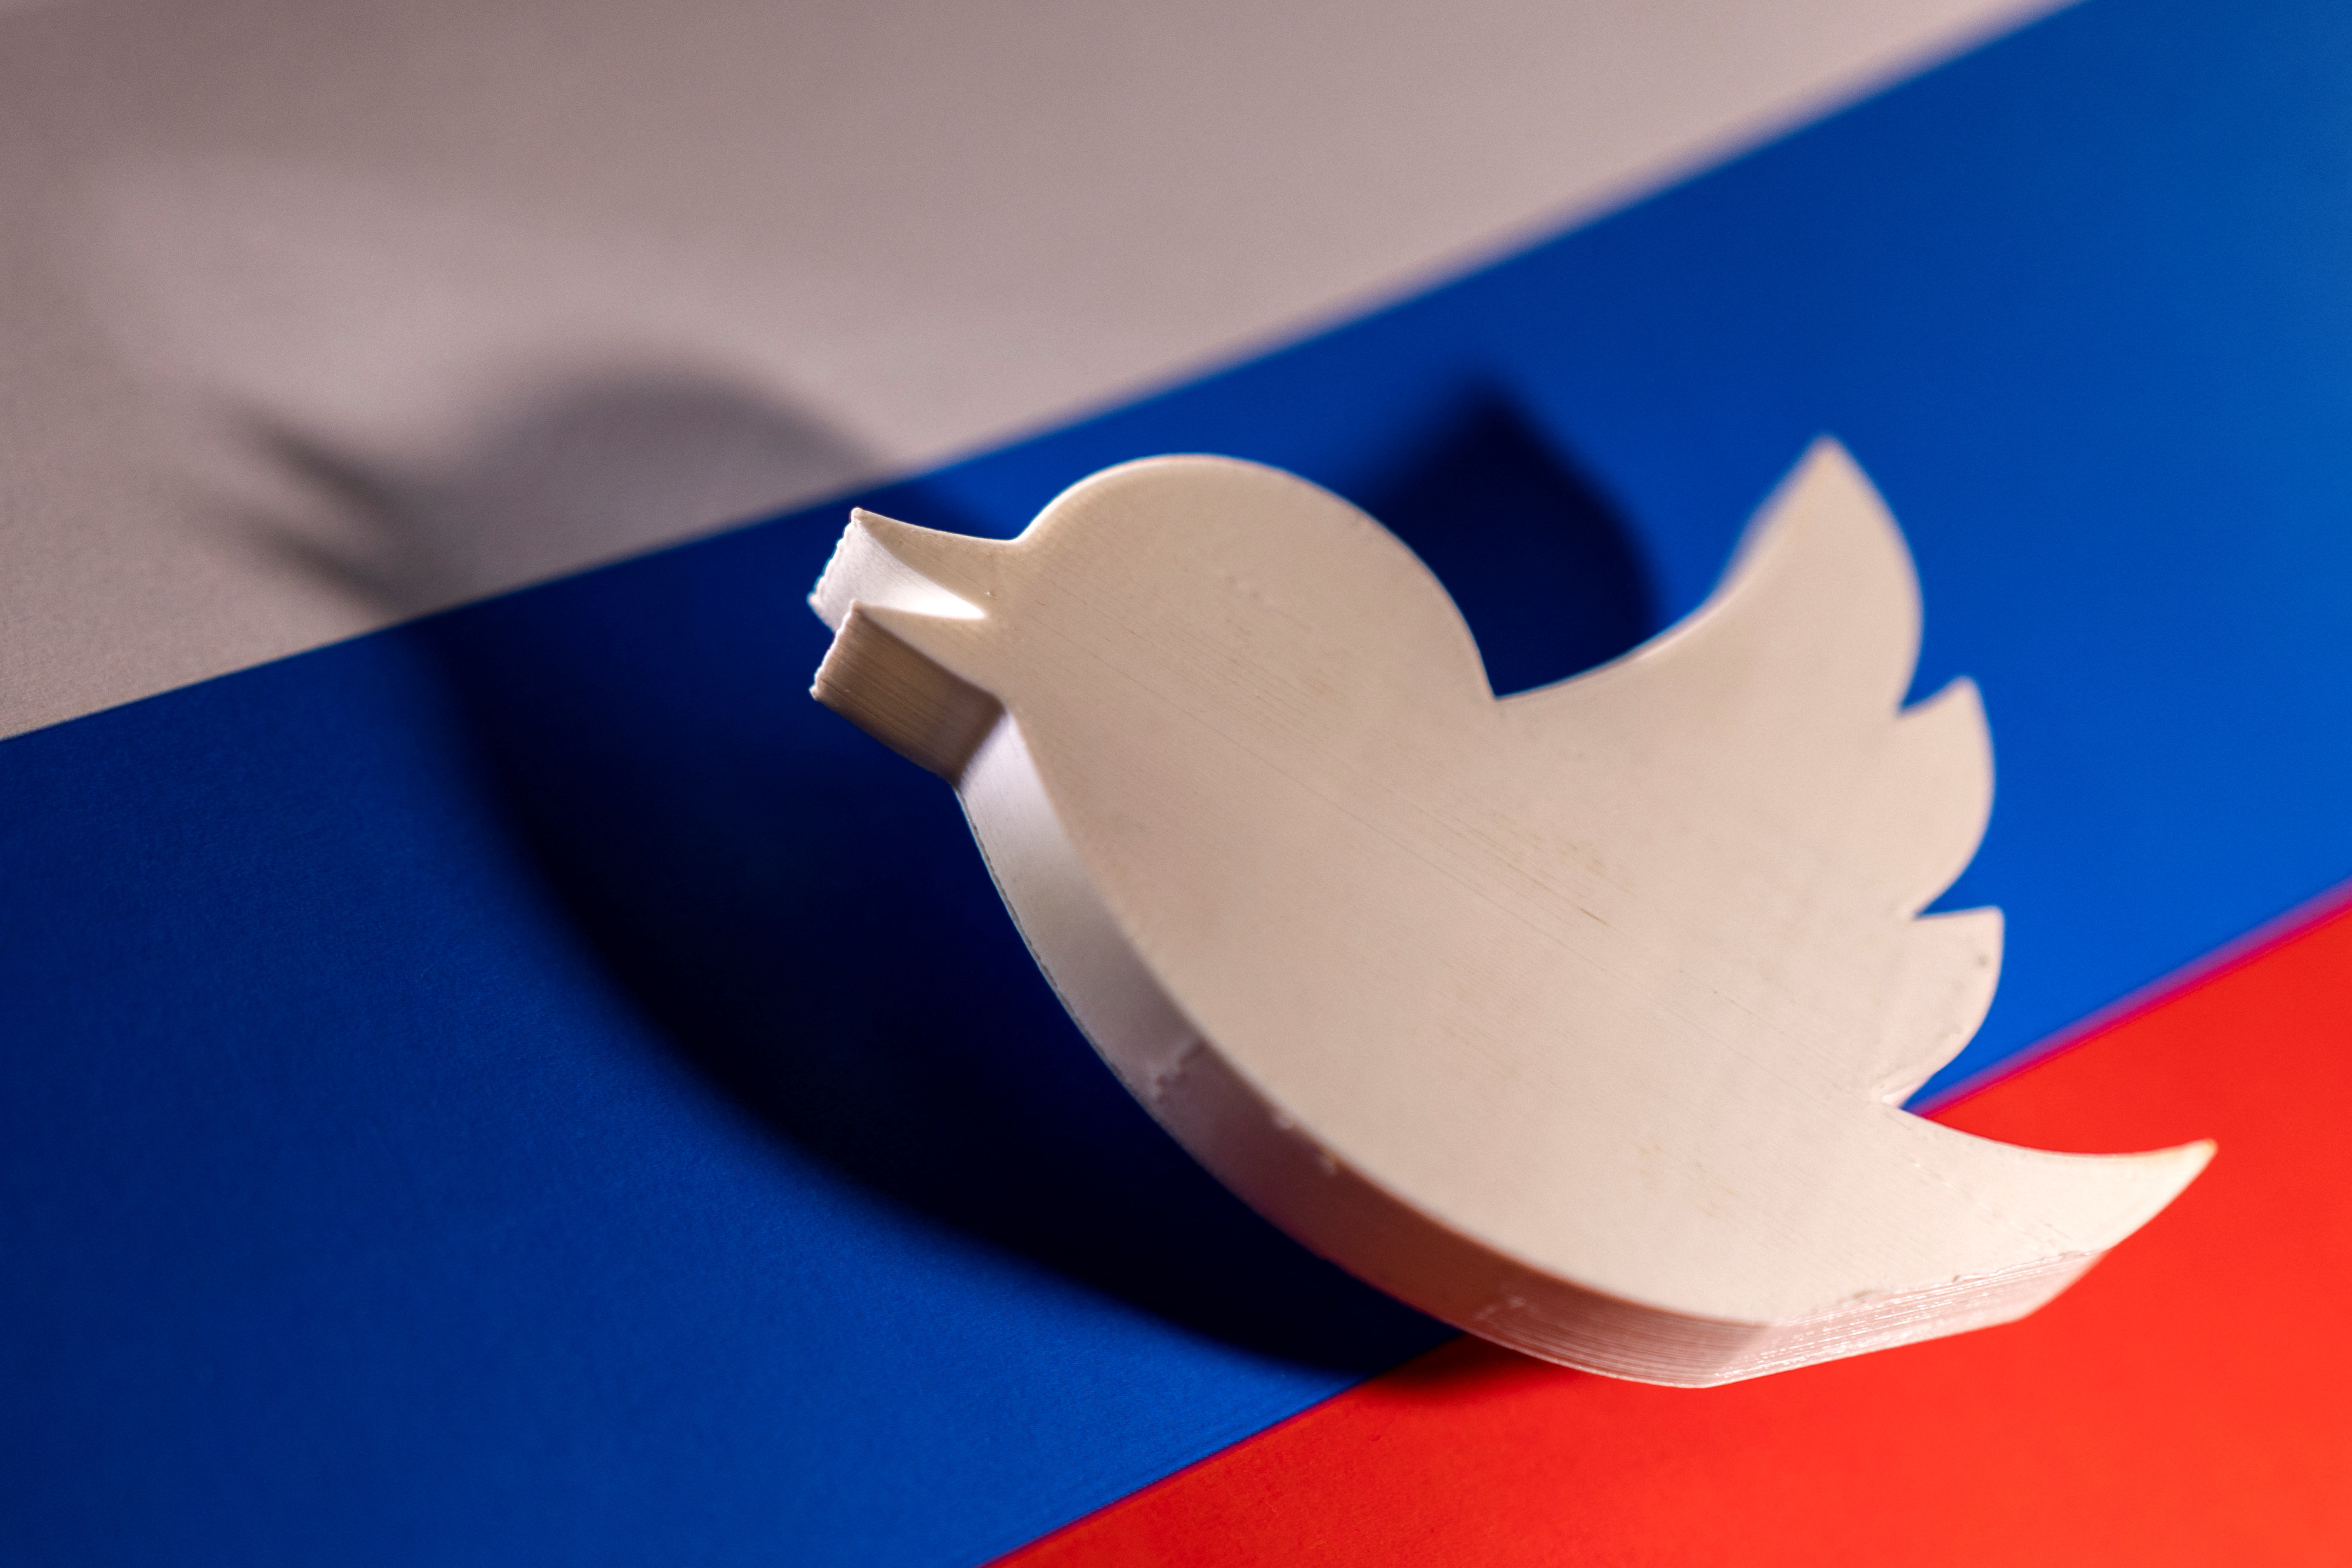 Illustration shows Twitter logo and Russian flag